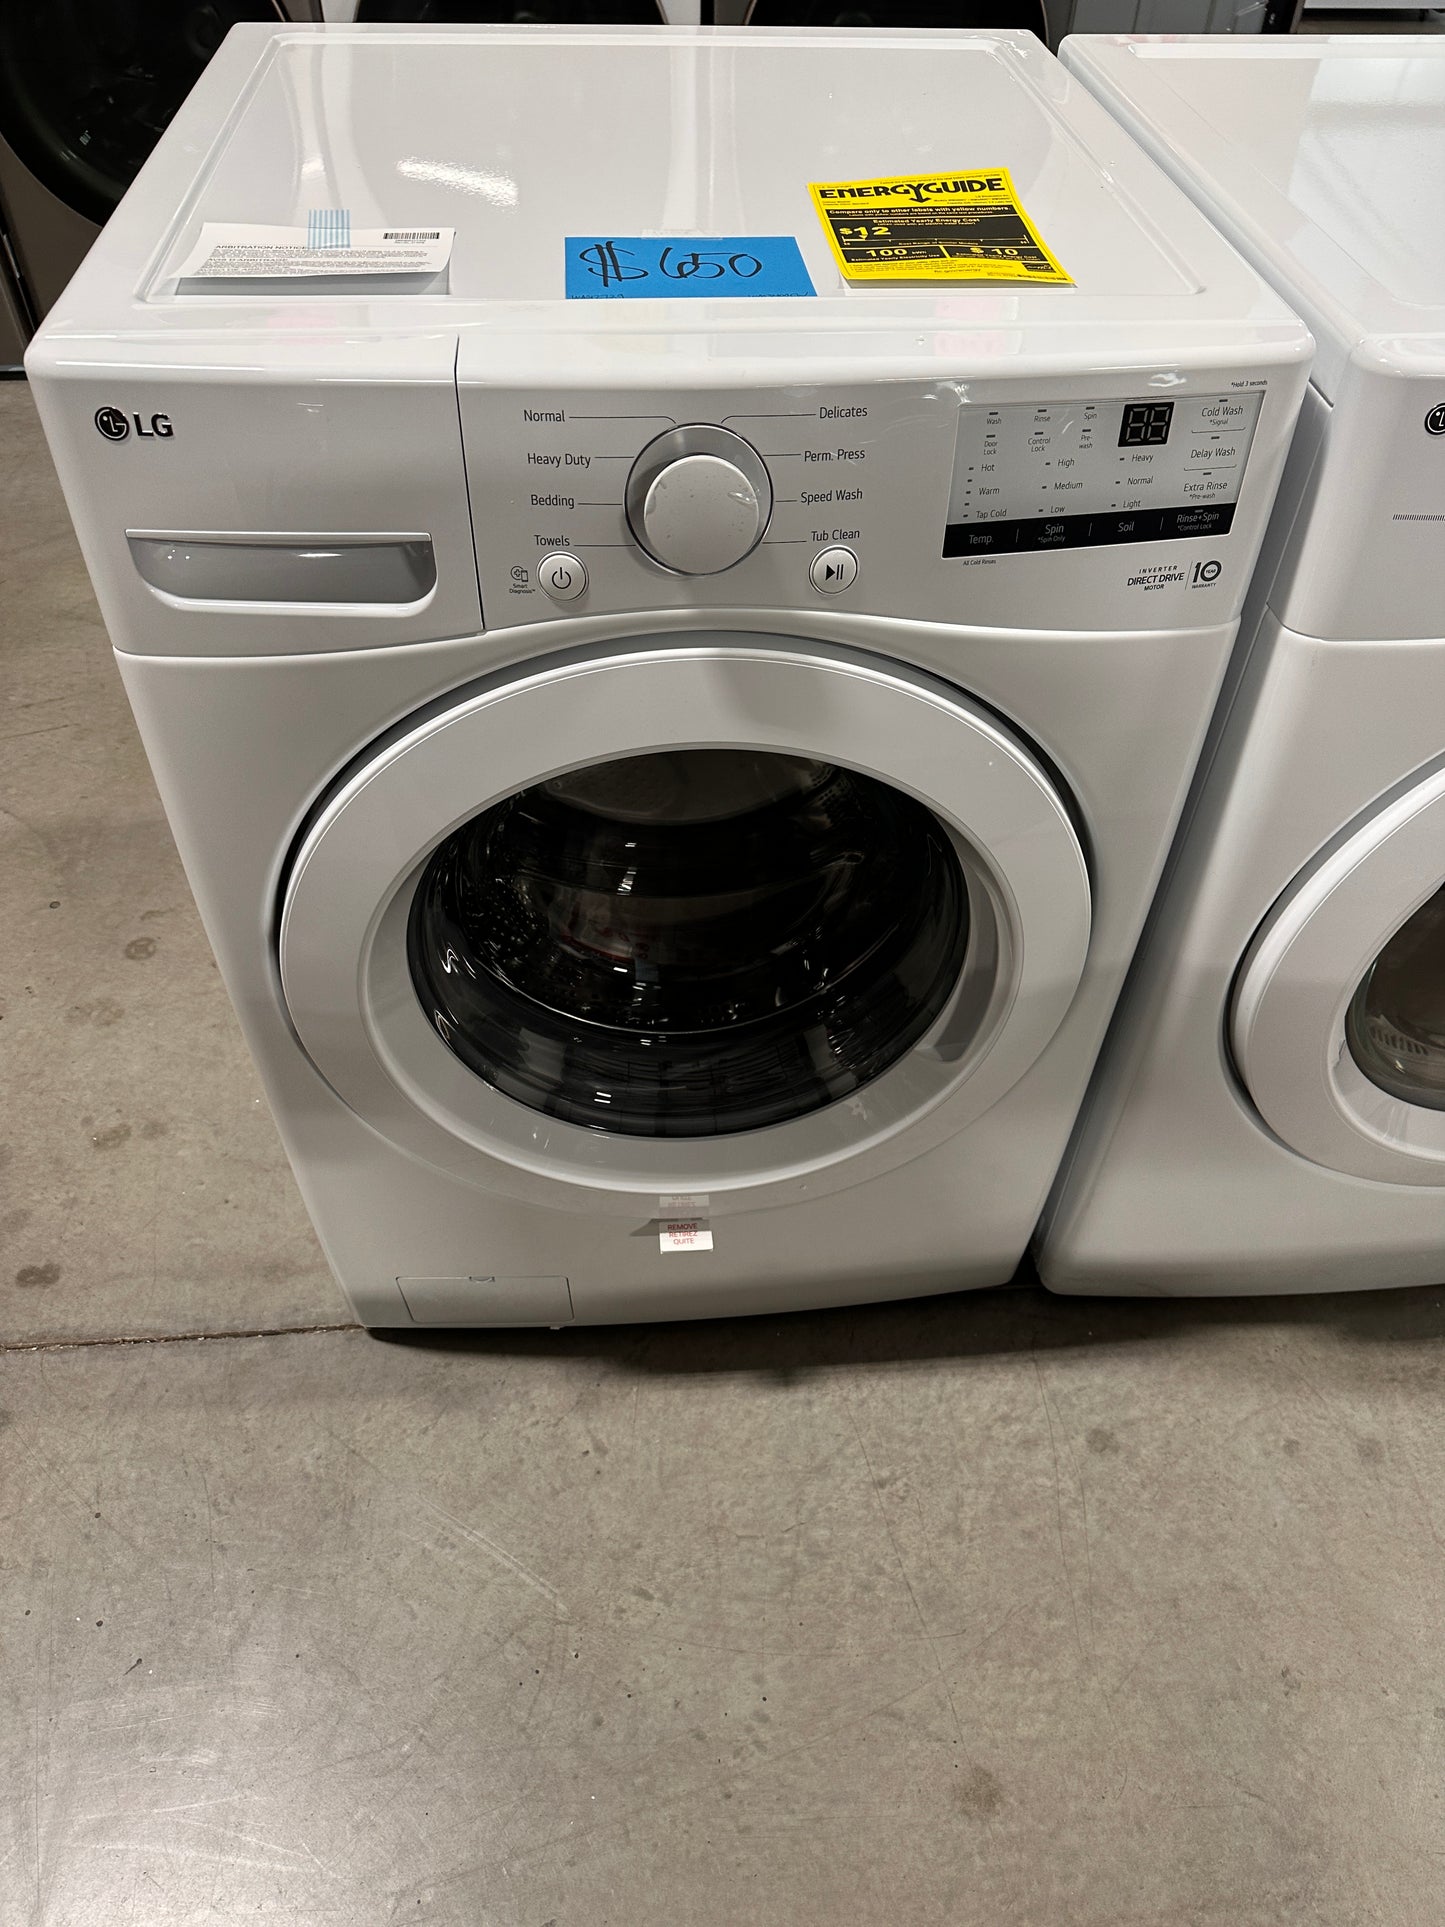 NEW LG STACKABLE FRONT LOAD WASHER - WAS12729